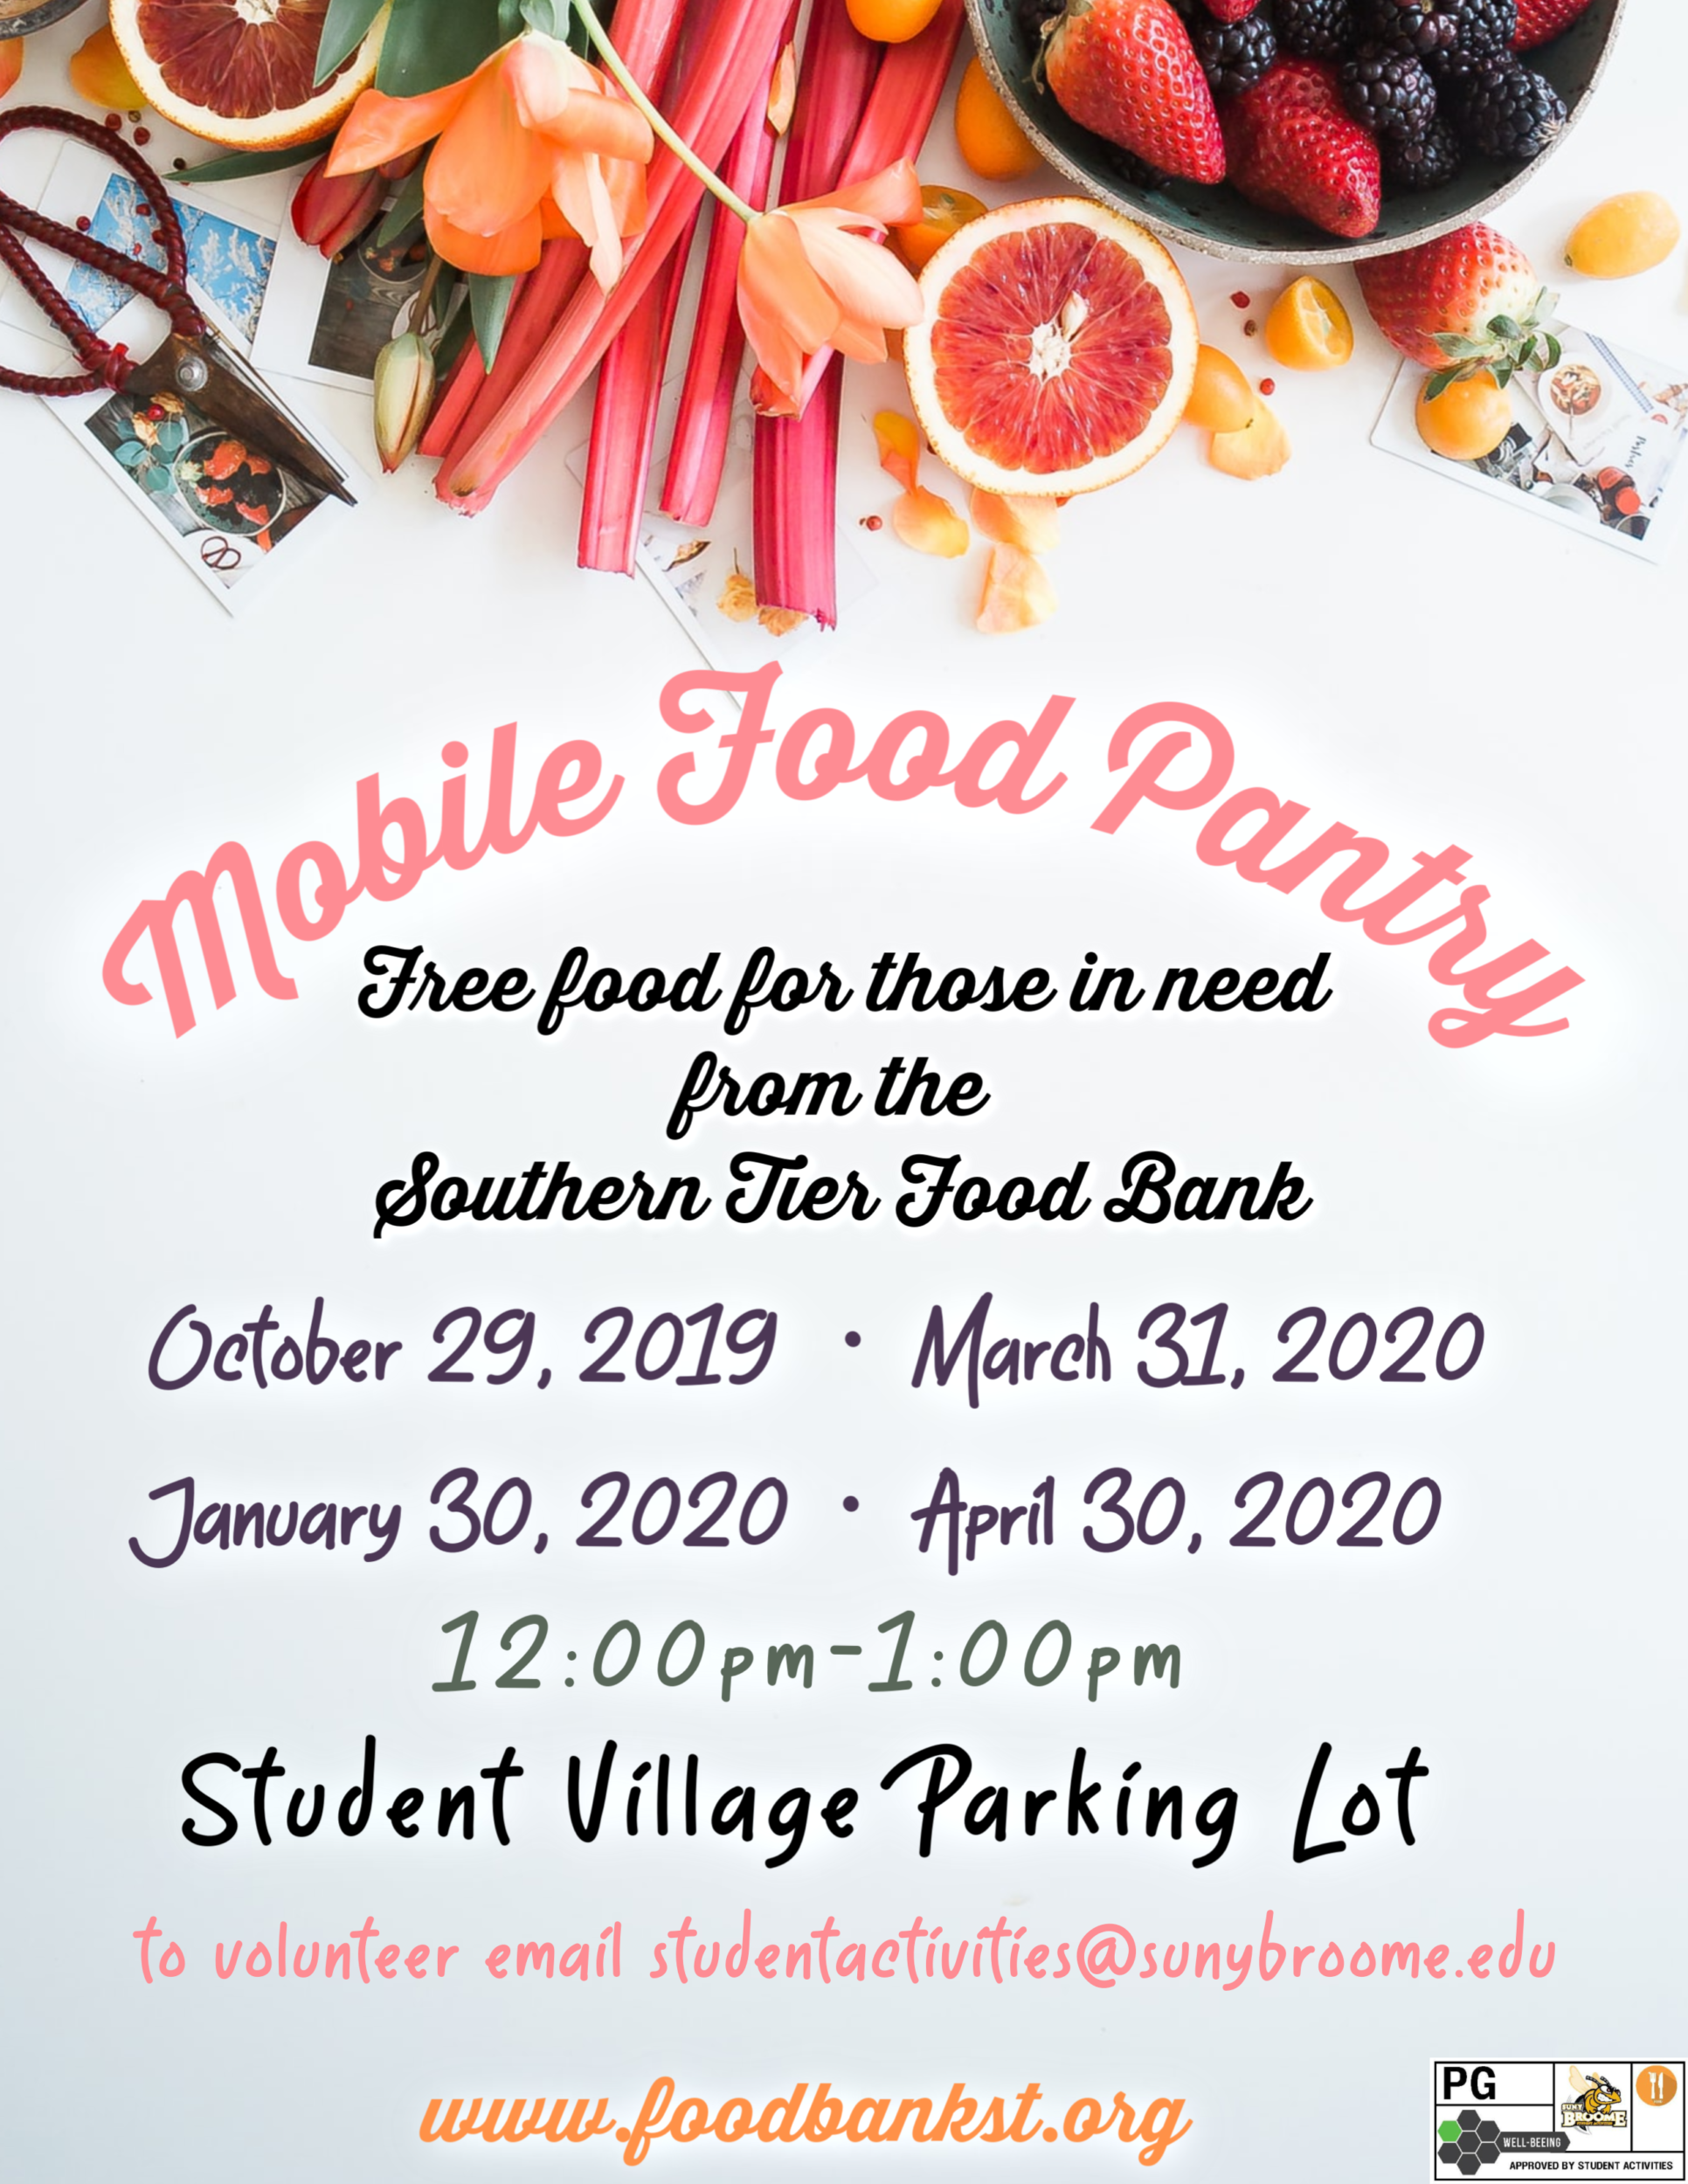 Mobile food pantry to schedule campus visits The Buzz